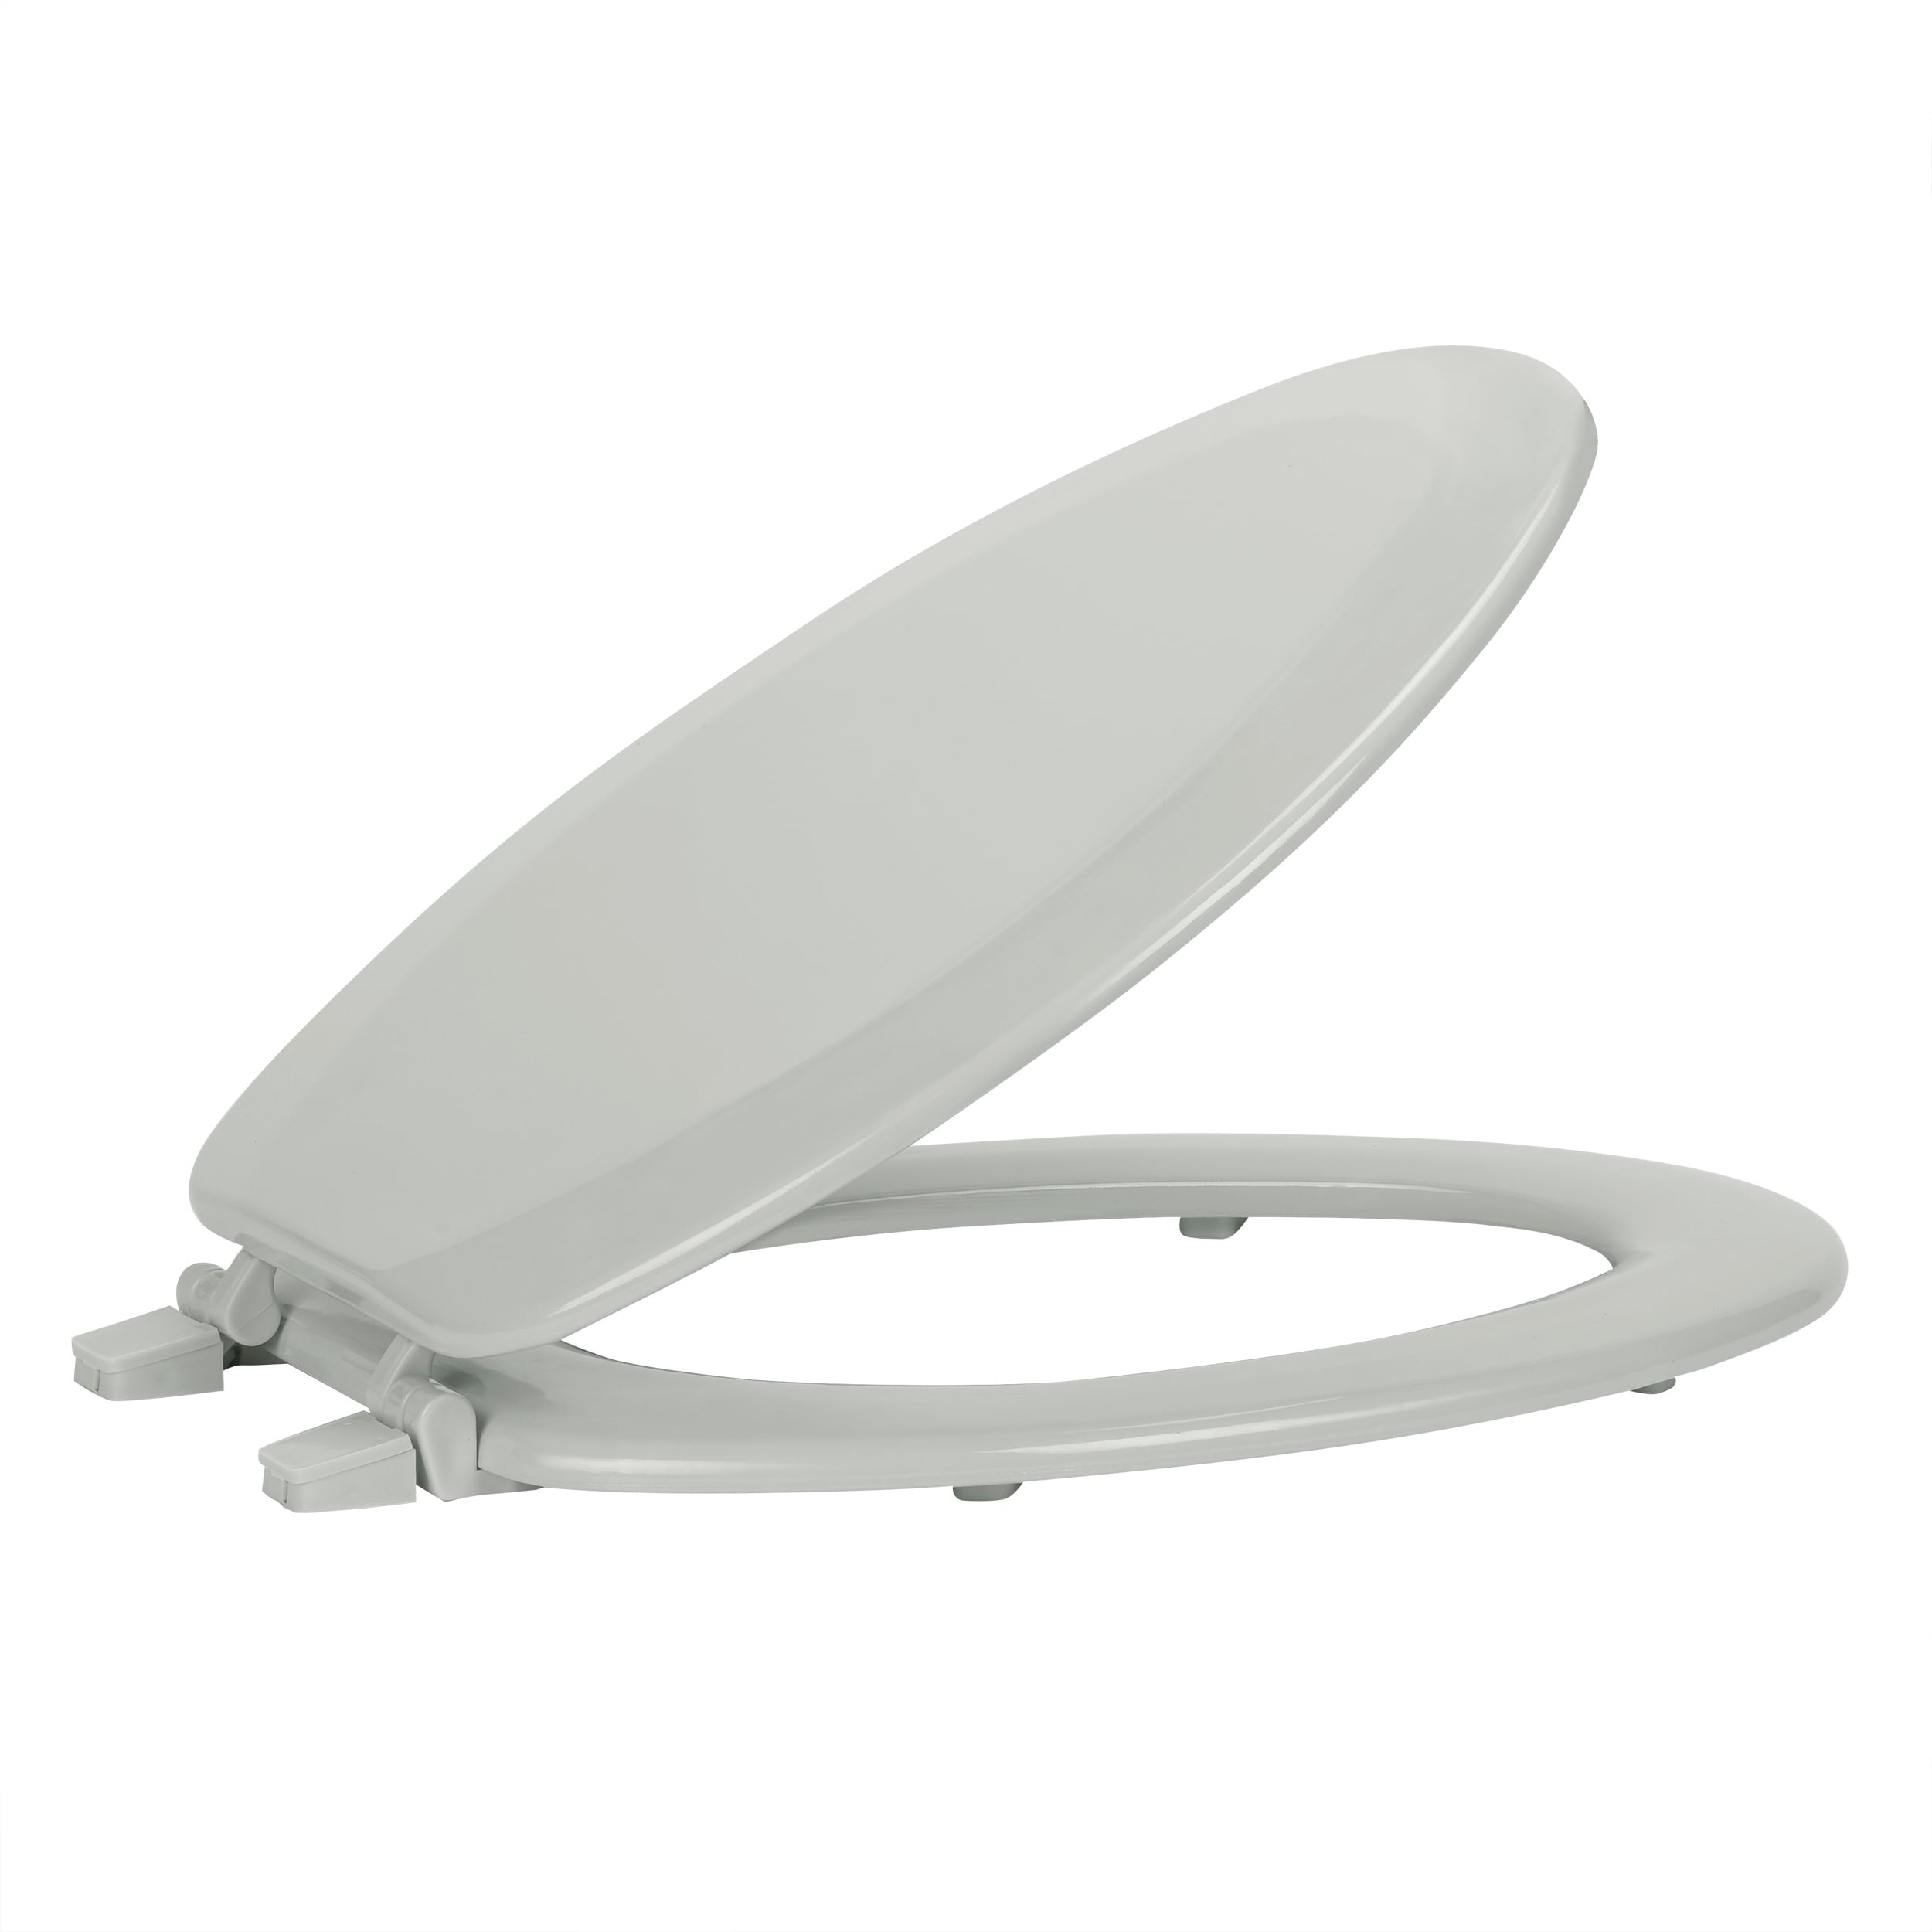 18 inch elongated toilet seat